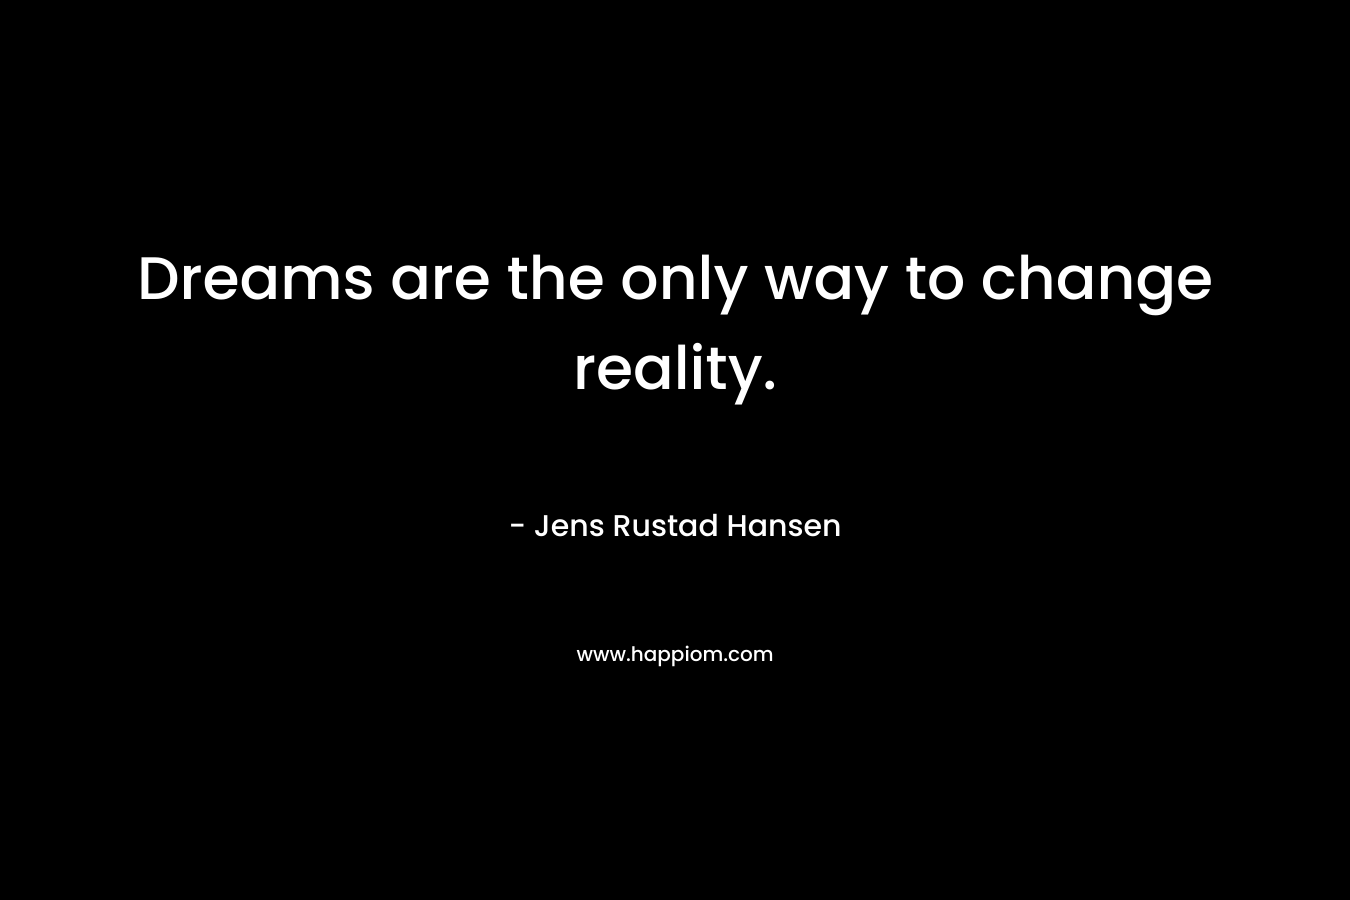 Dreams are the only way to change reality.